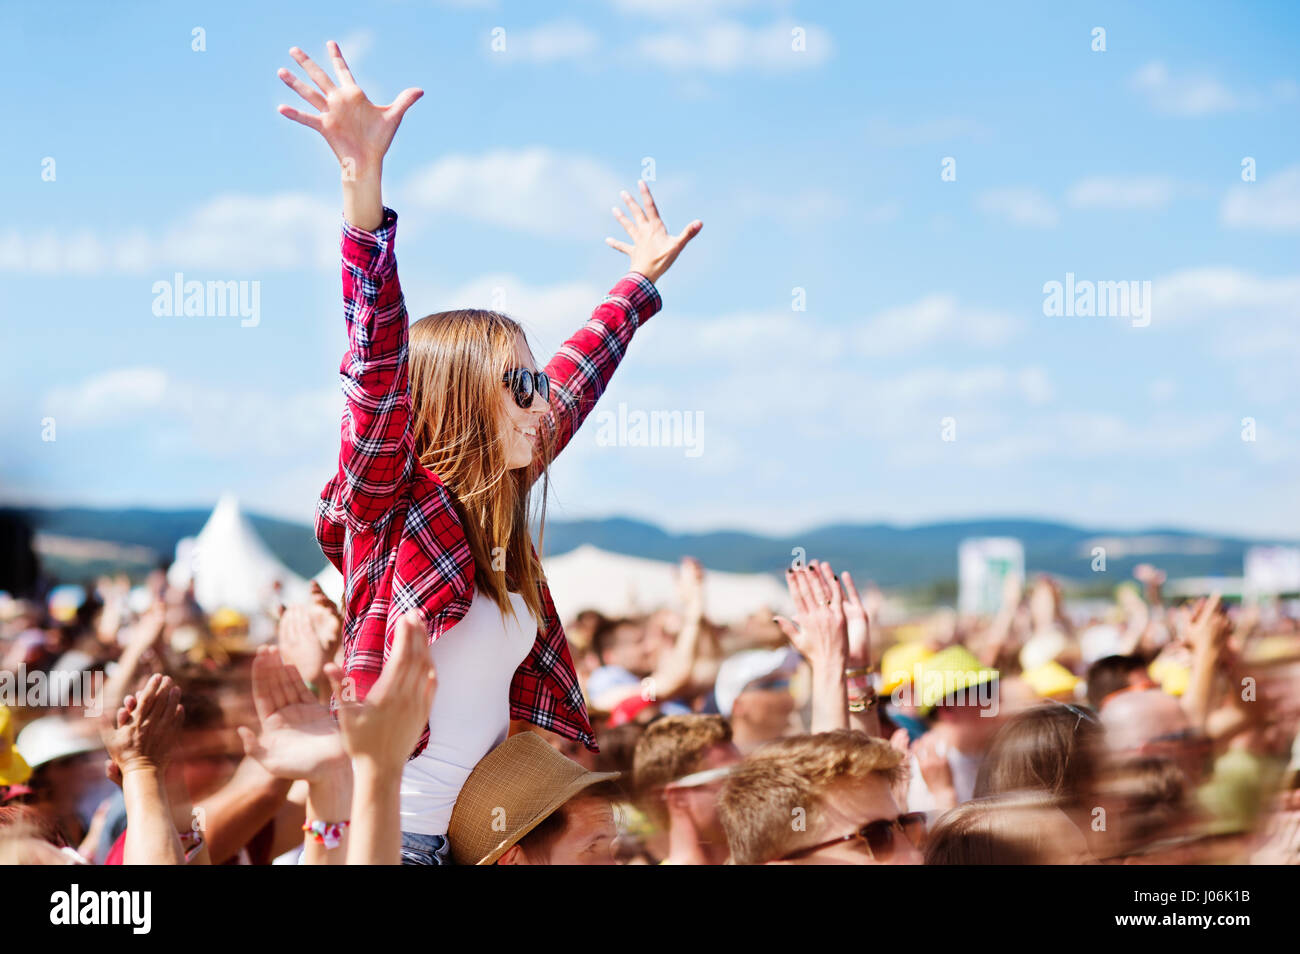 Teenagers at summer music festival enjoying themselves Stock Photo